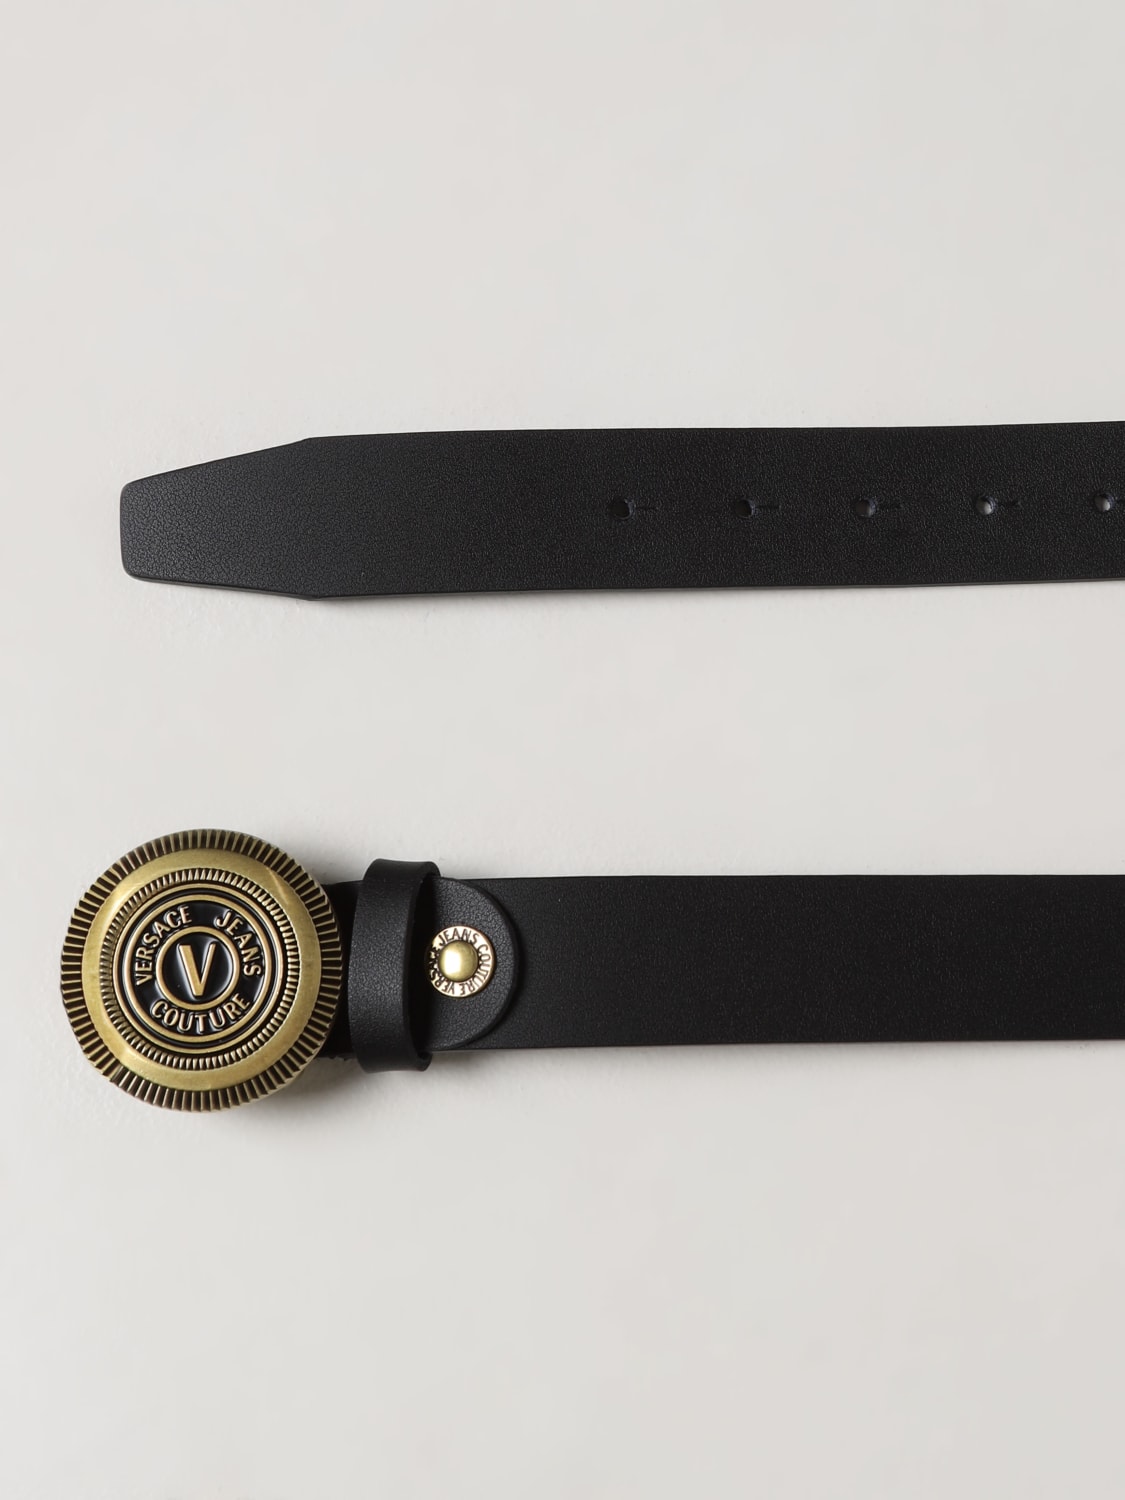 Versace Jeans Couture Outlet: belt for man - Black  Versace Jeans Couture  belt 73YA6F0871627 online at